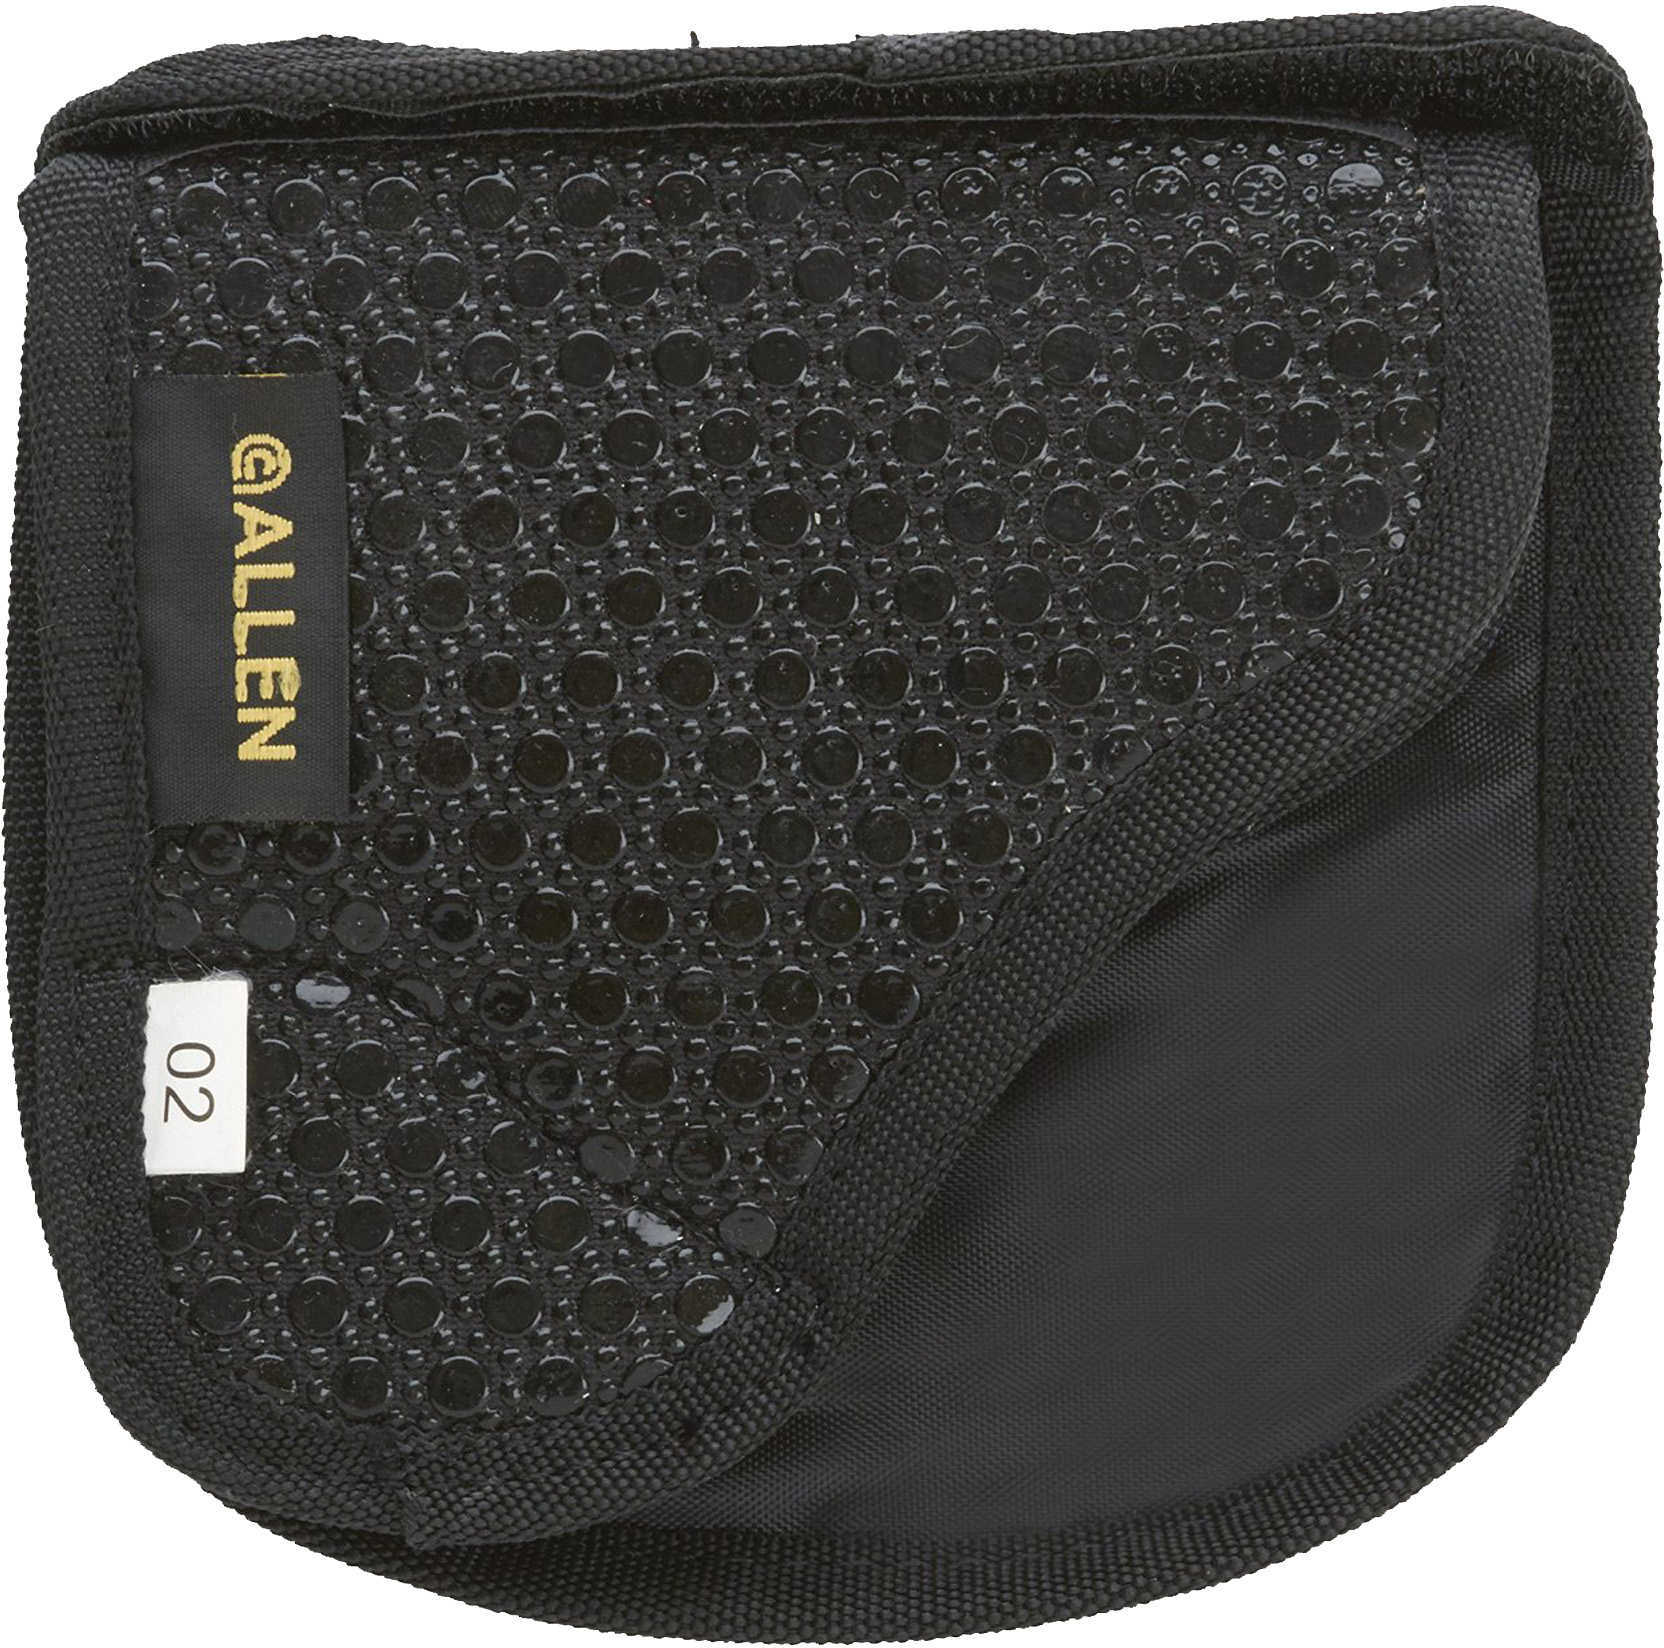 Allen Baseline In The Pocket Holster Ambidextrous Black Tacky Fabric Fits Small Semi-automatic Pistols 44202